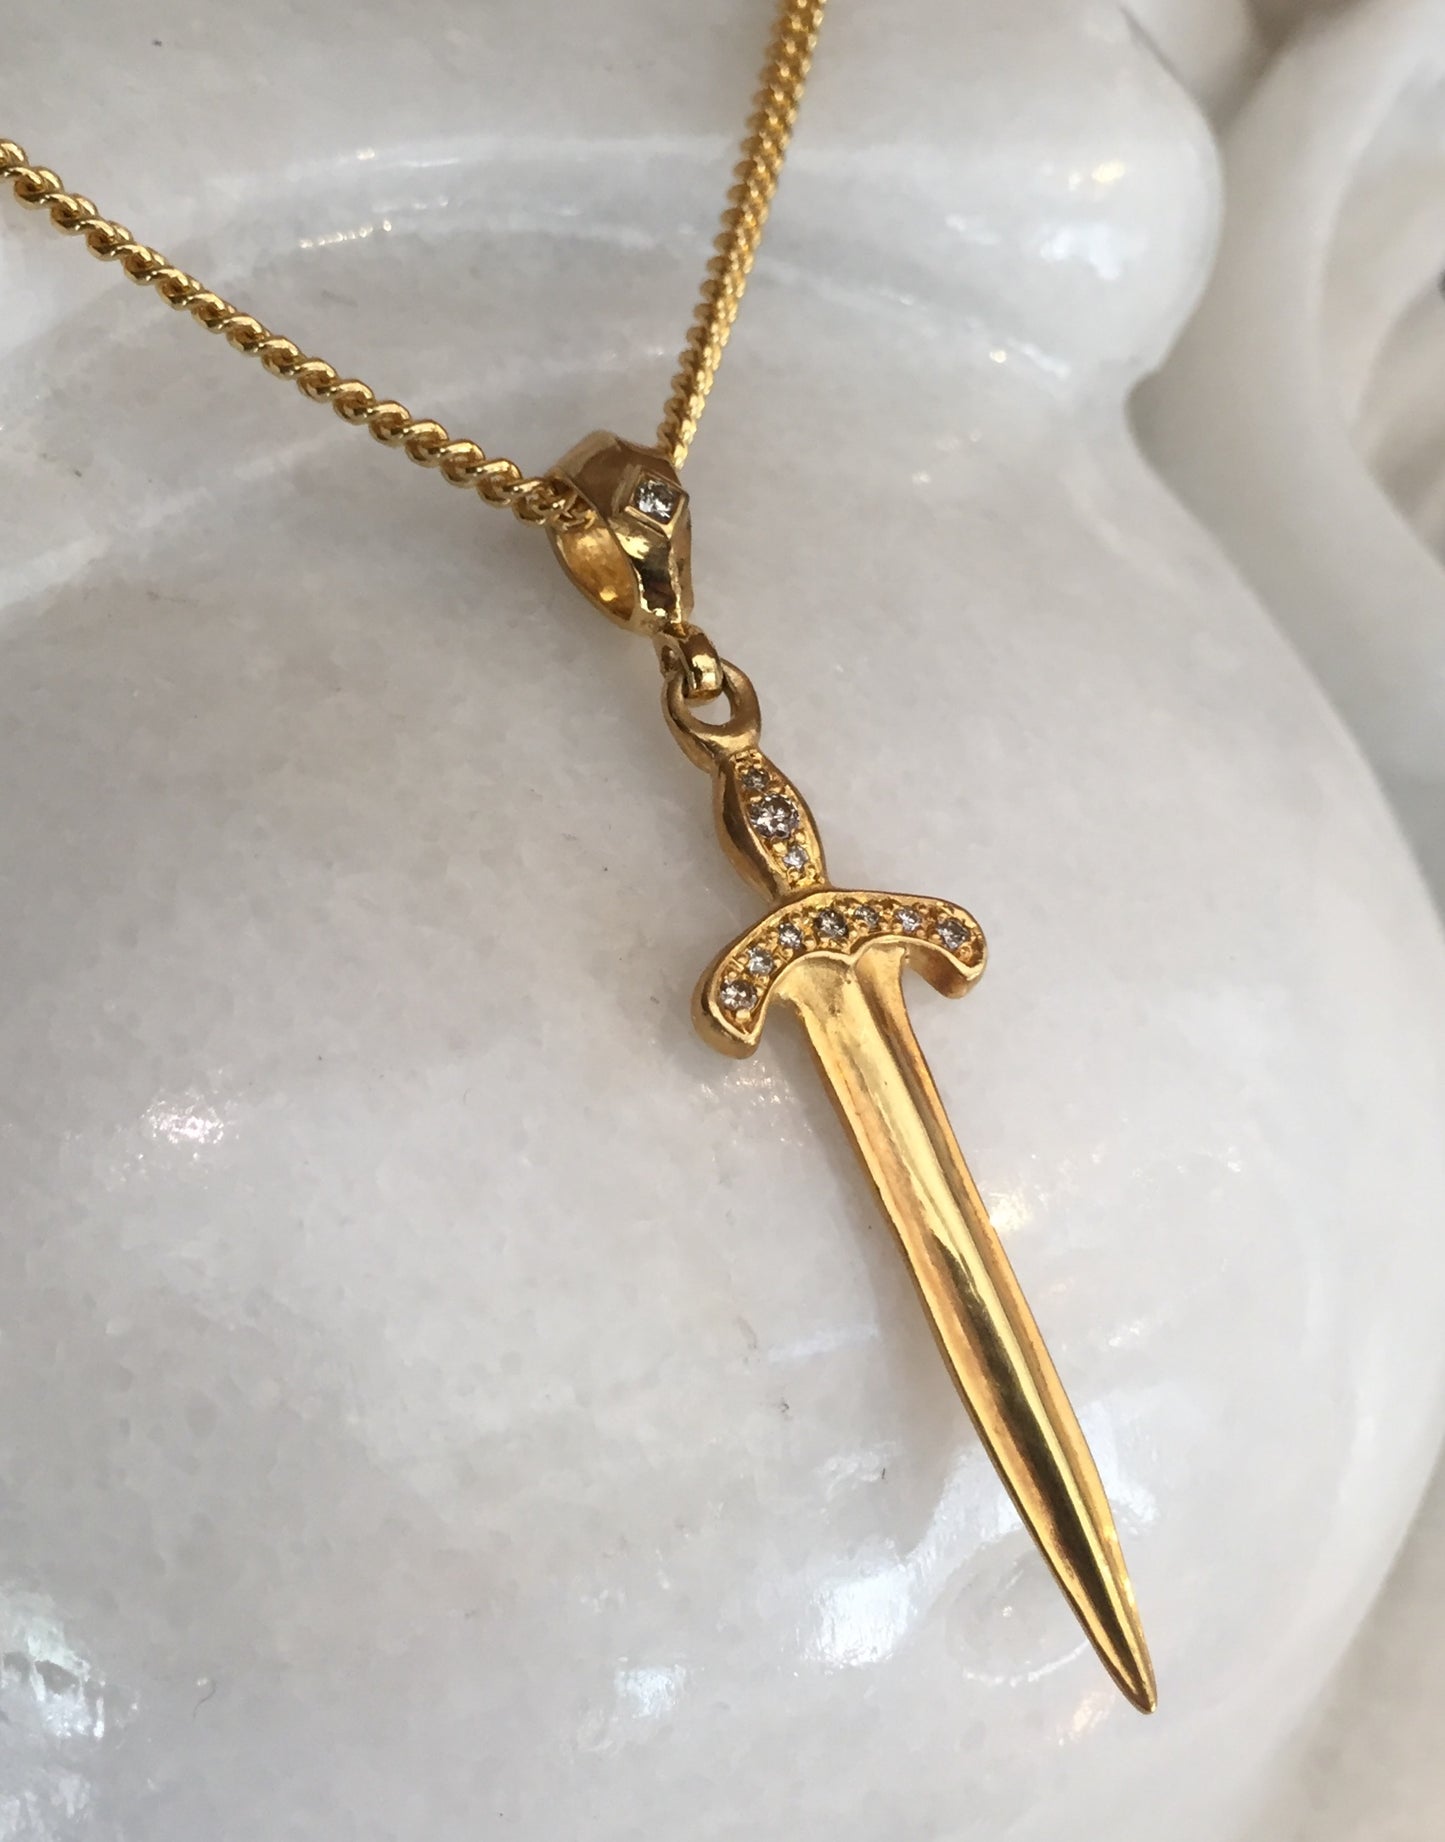 Necklace - Golden Knight's Sword With Diamonds by Roman Paul in Sterling Silver